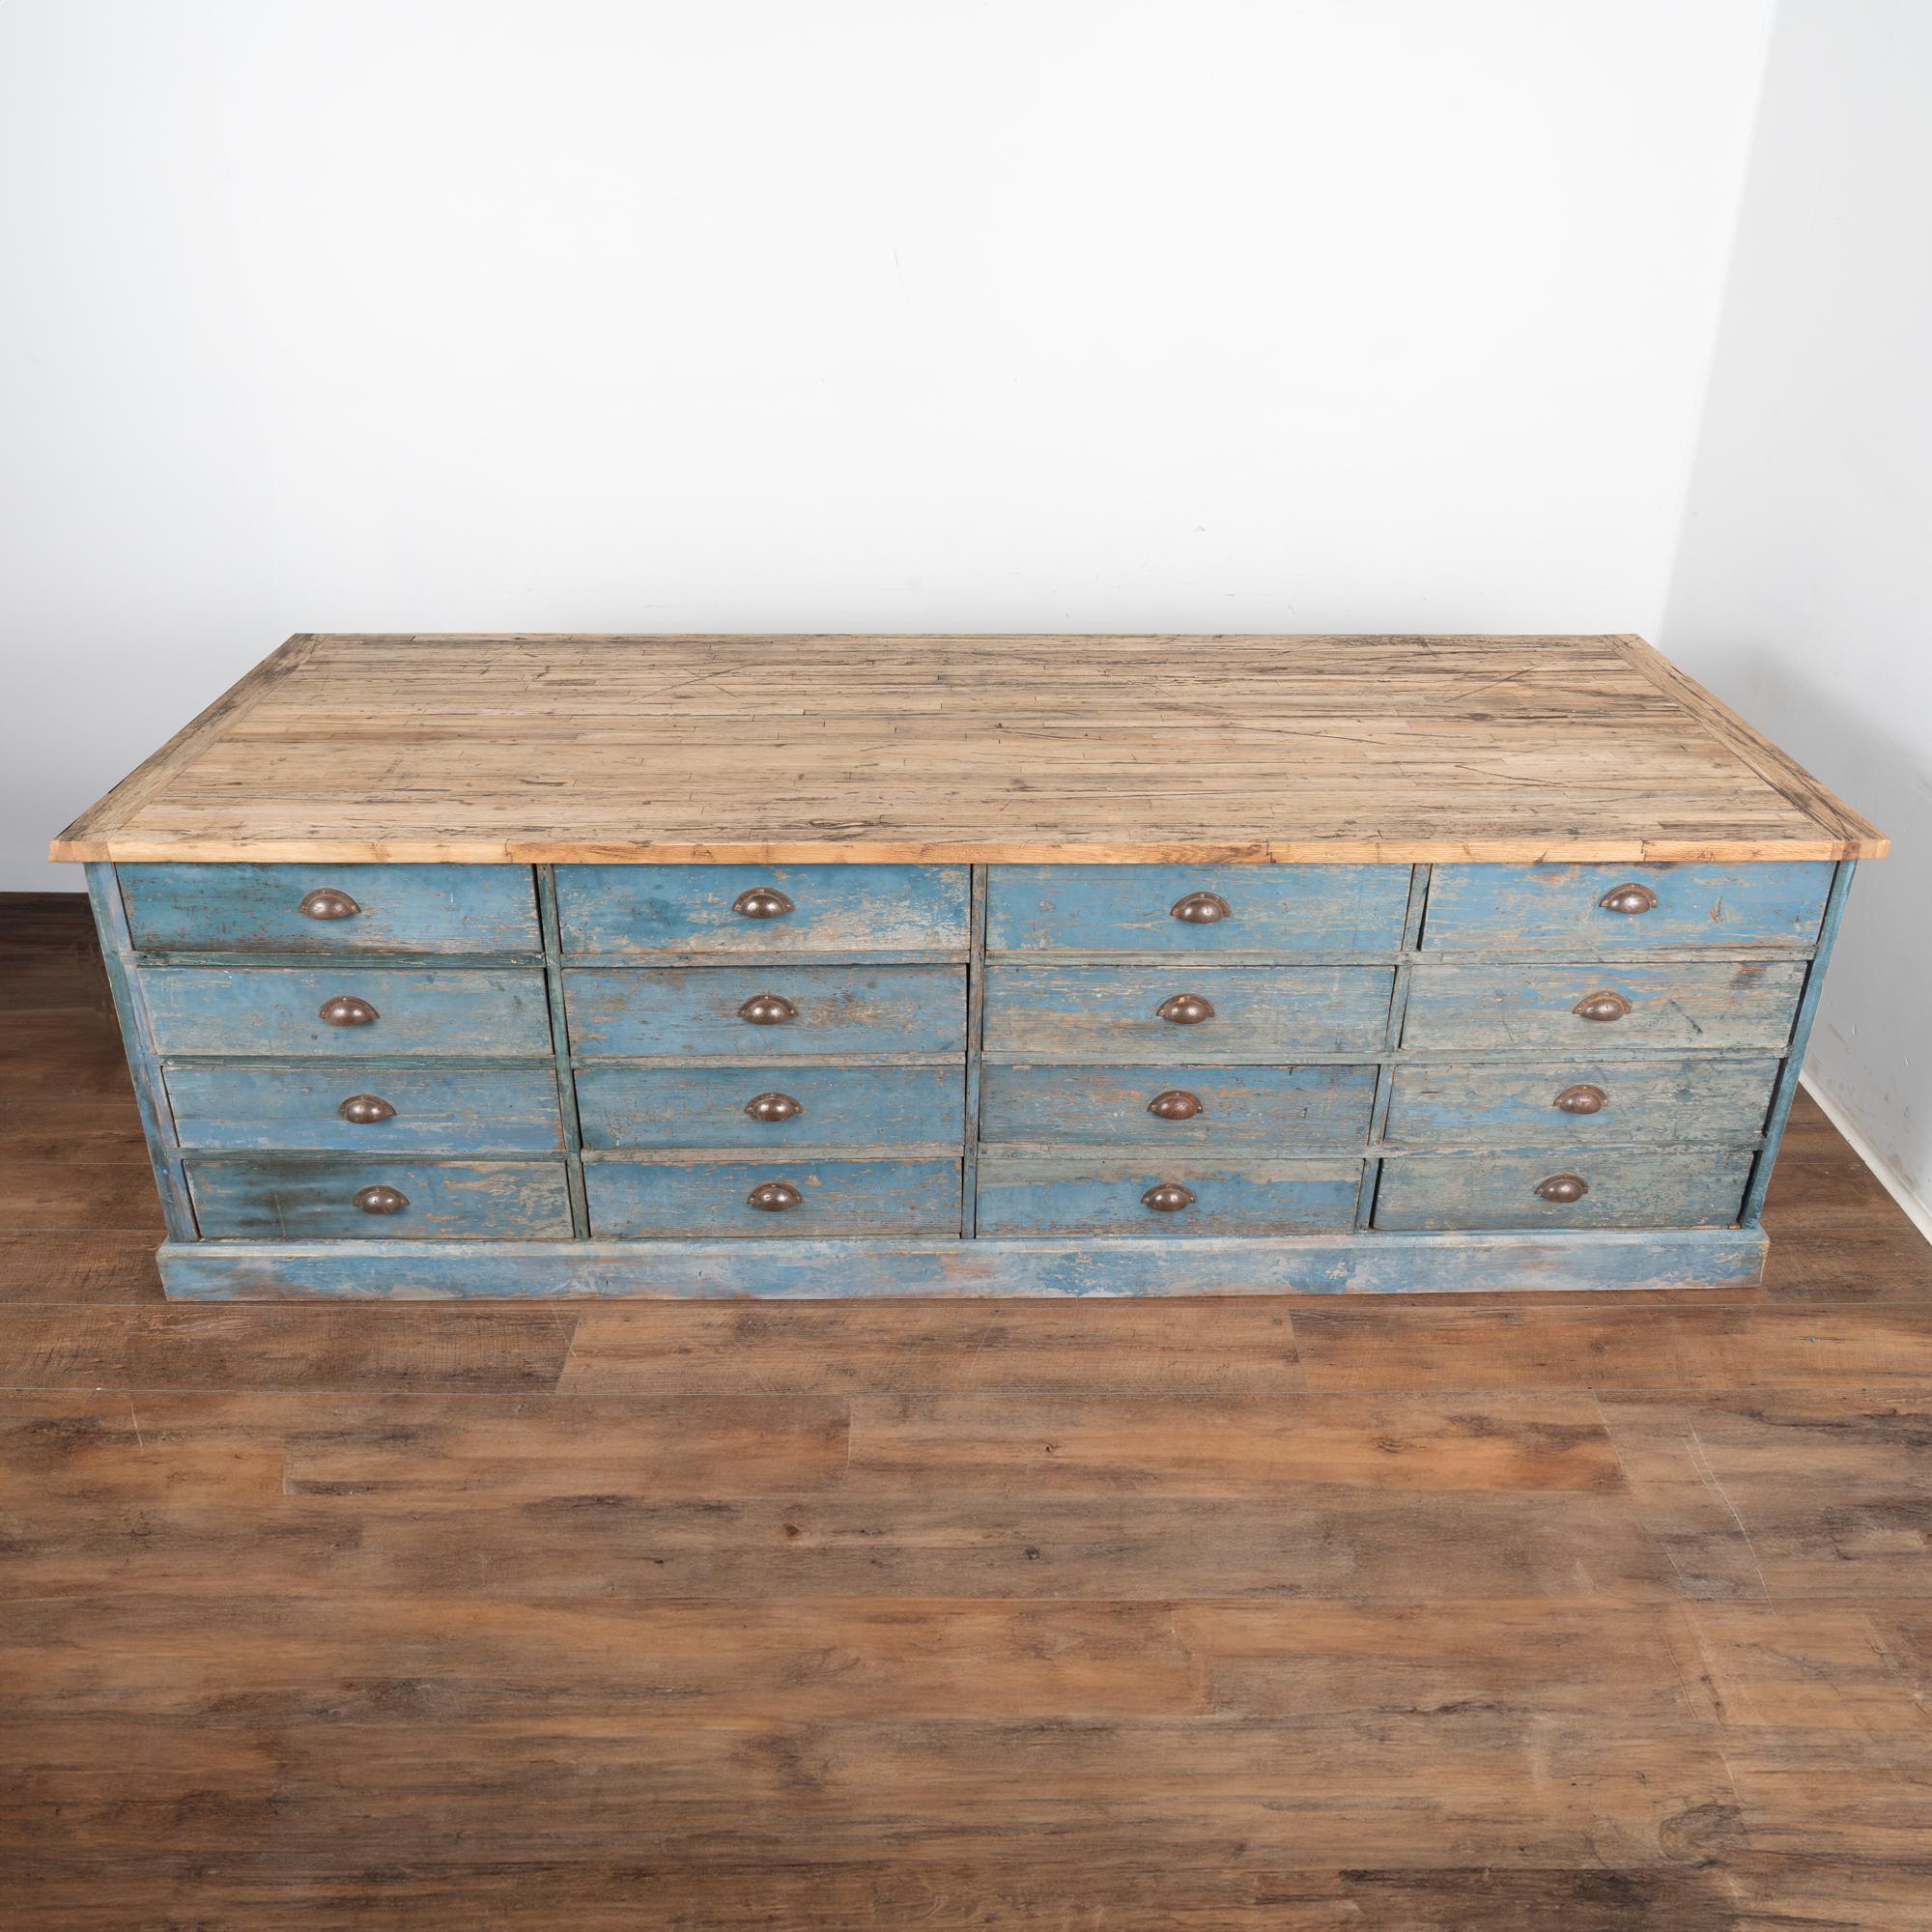 19th Century Large Blue Painted Rustic Kitchen Island Shop Apothecary, Sweden circa 1890